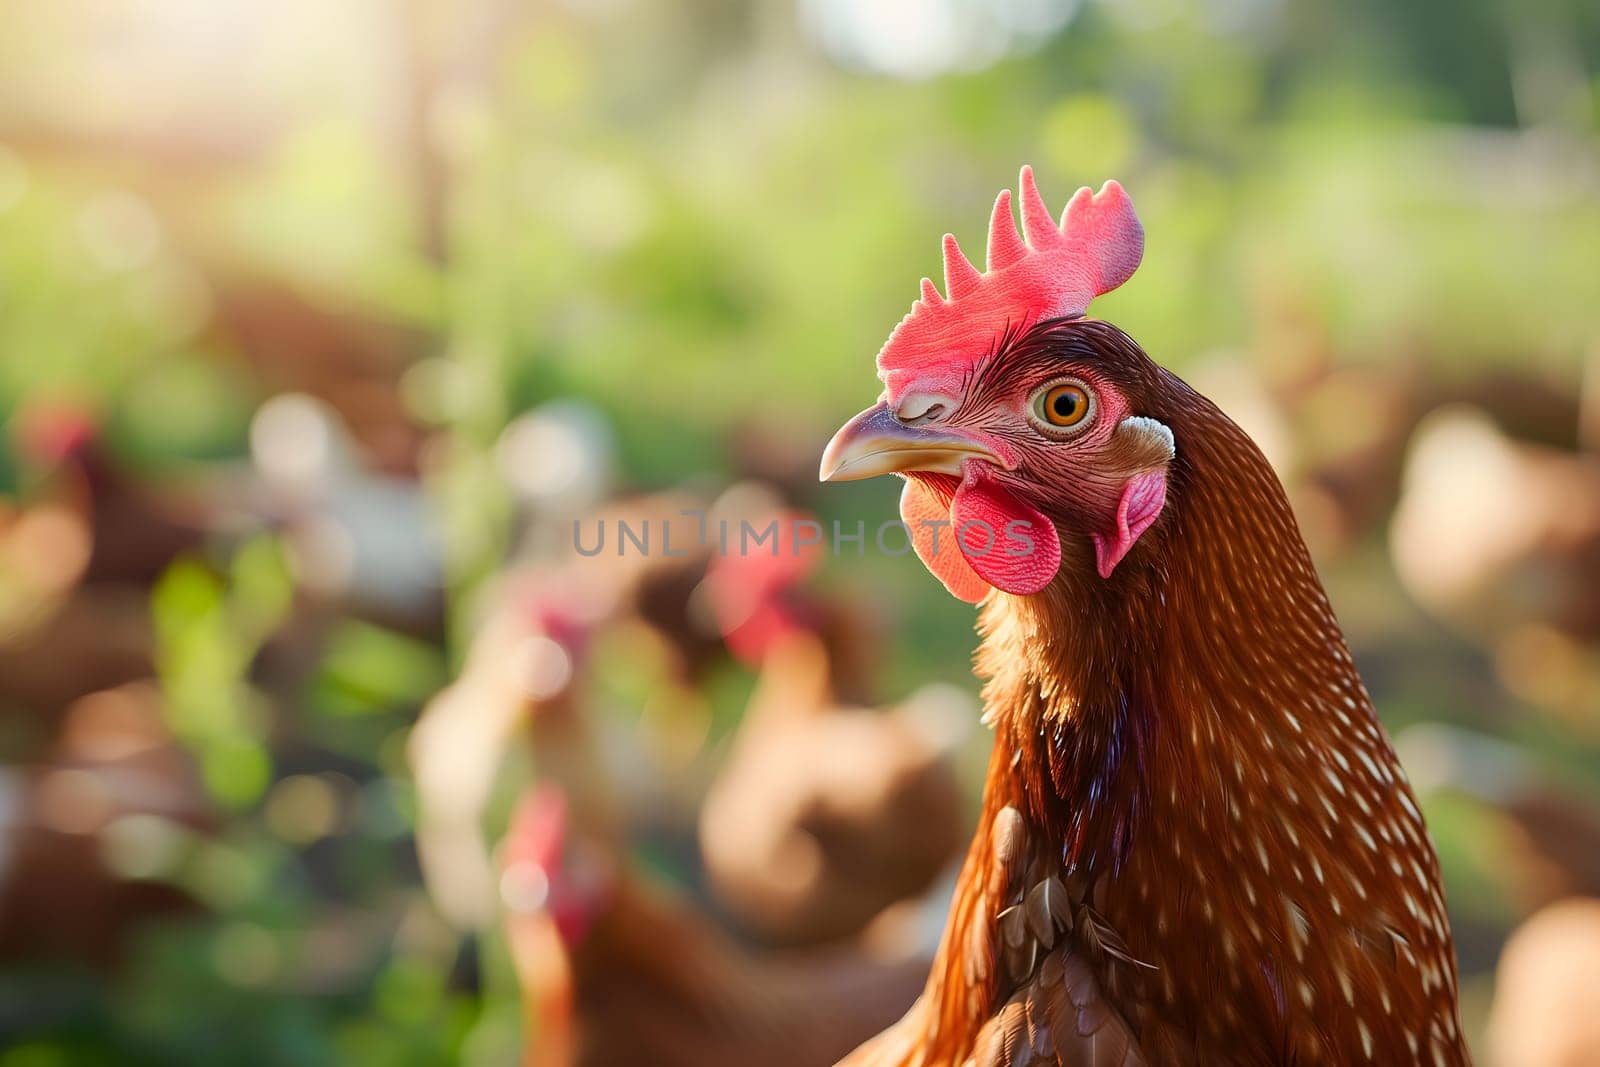 Portrait of hen on the chicken farm, closeup with bokeh. Neural network generated image. Not based on any actual person or scene.